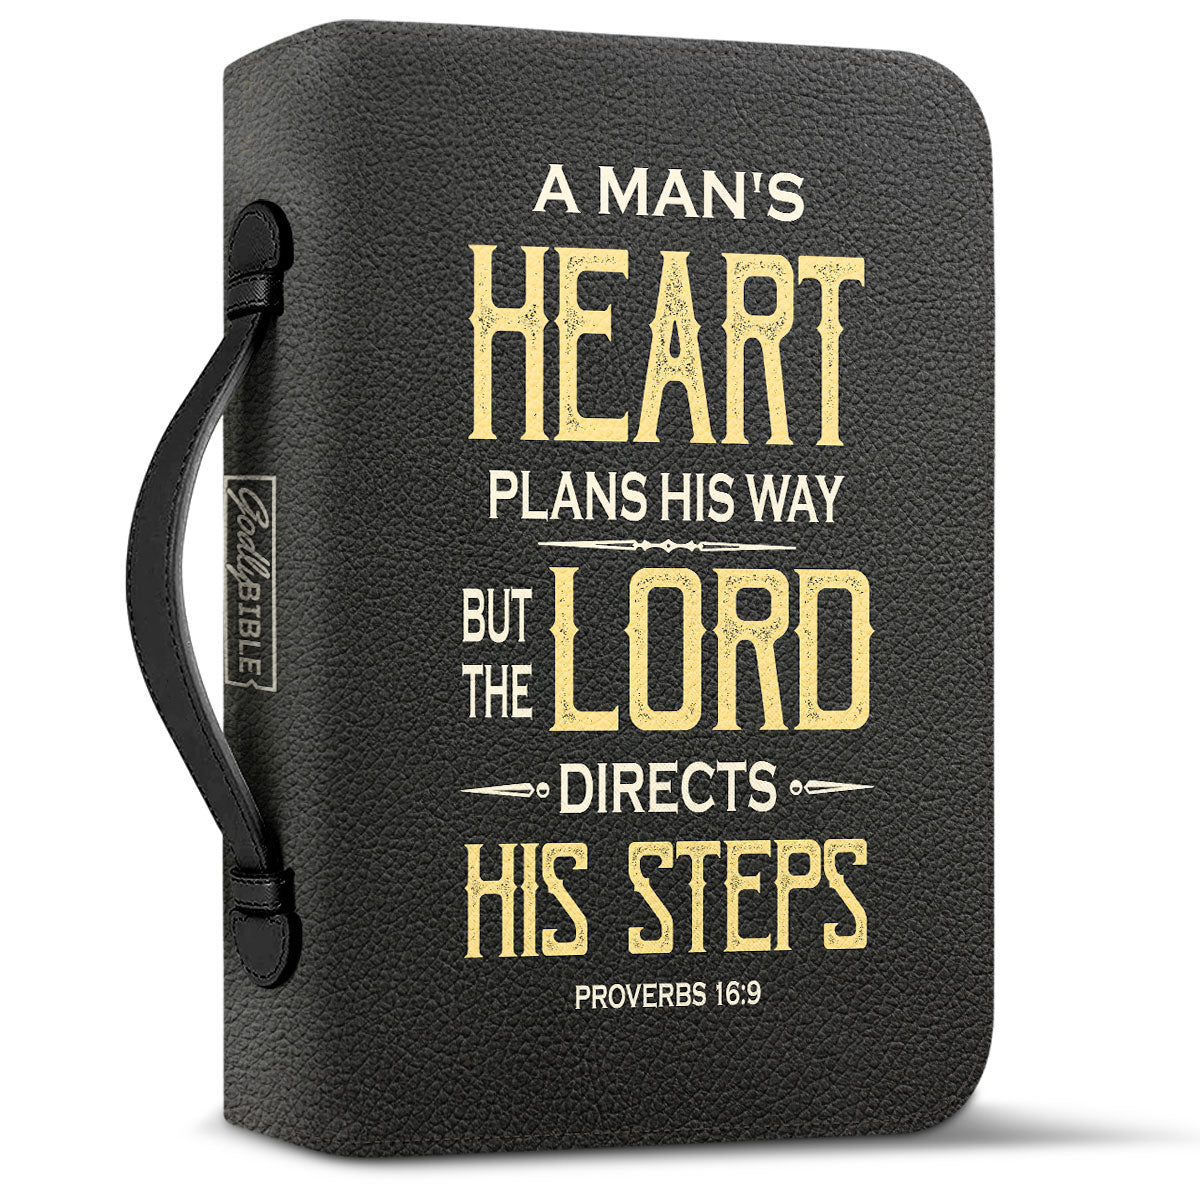 A Mans Heart Plans His Way Proverbs 16 9 Lion God Personalized Bible Cover - Gift Bible Cover for Christians